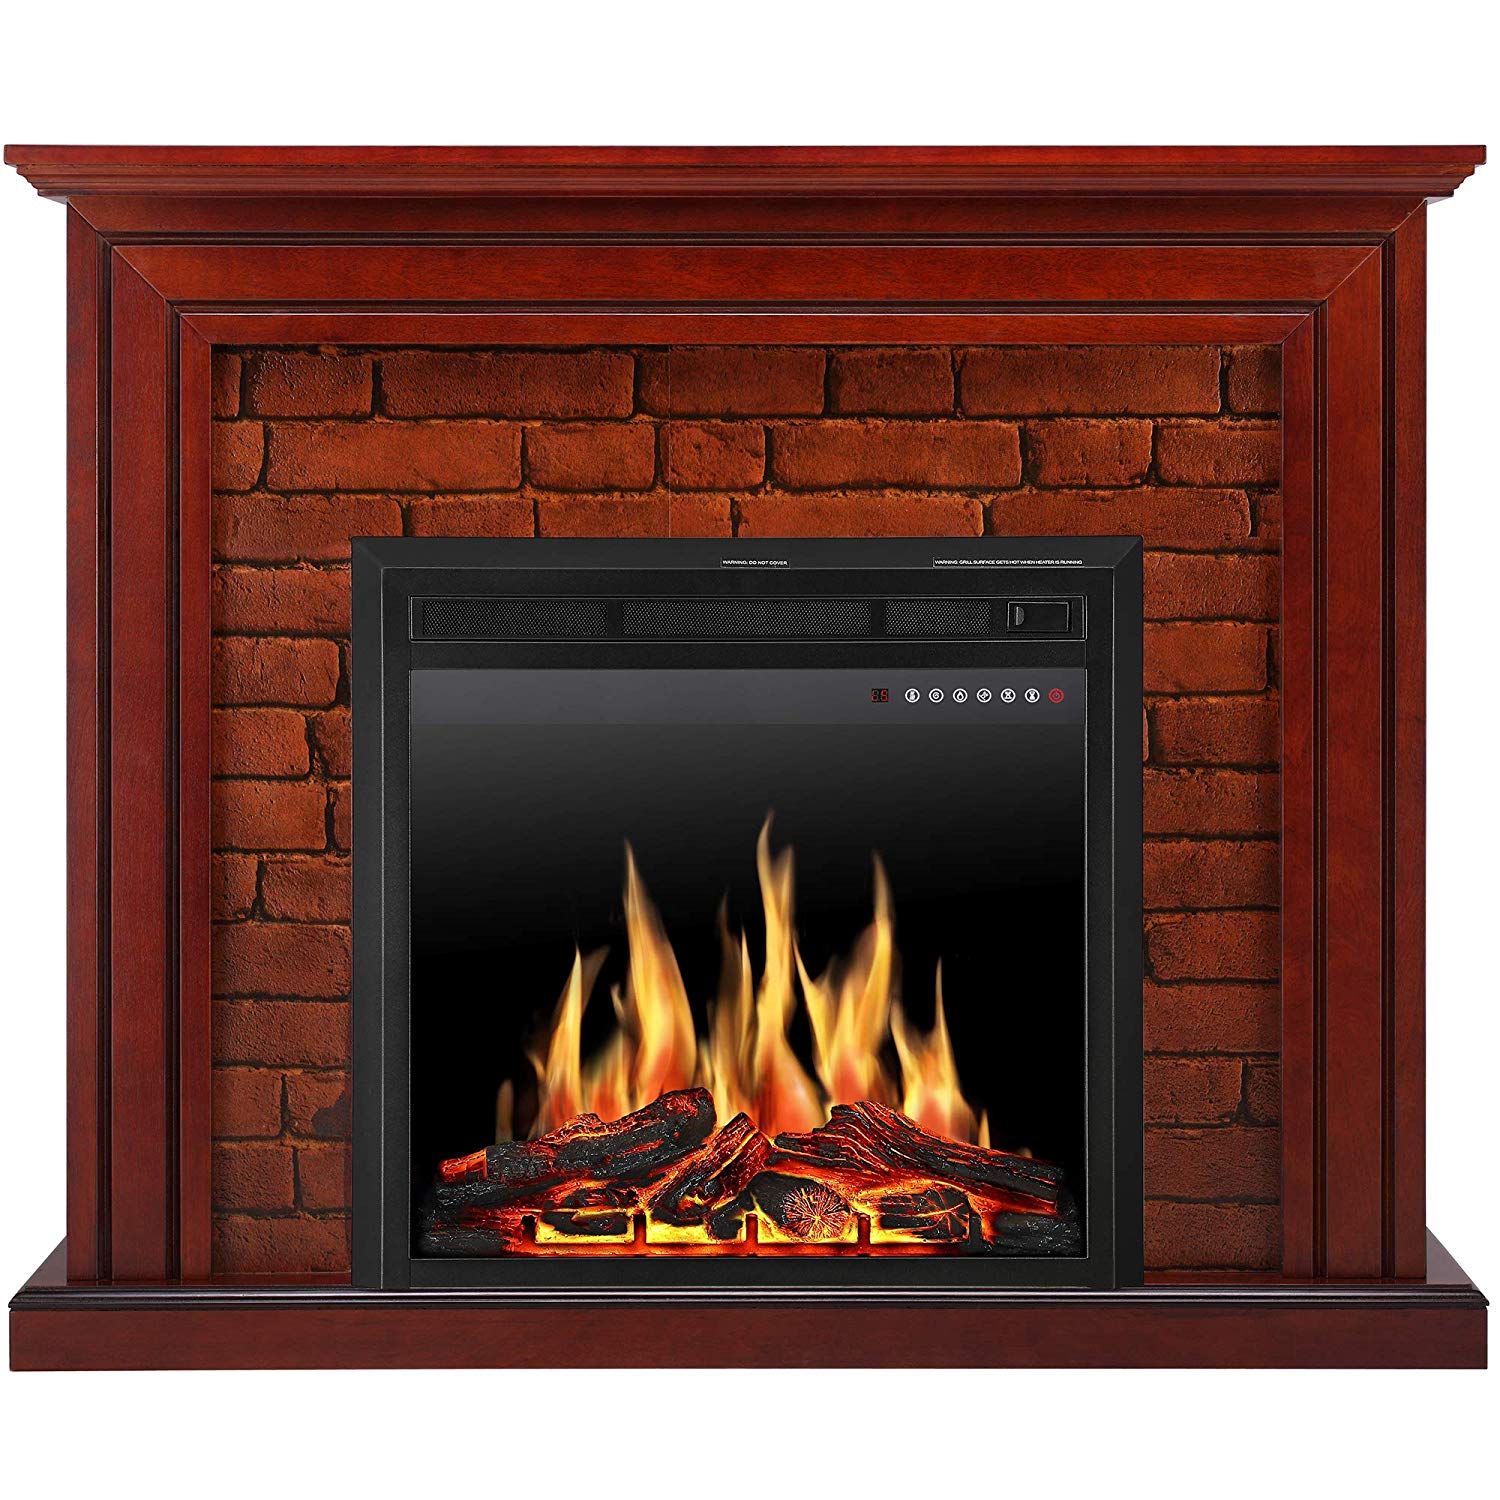 26 Electric Fireplace Insert Awesome Jamfly Electric Fireplace Mantel Package Traditional Brick Wall Design Heater with Remote Control and Led touch Screen Home Accent Furnishings